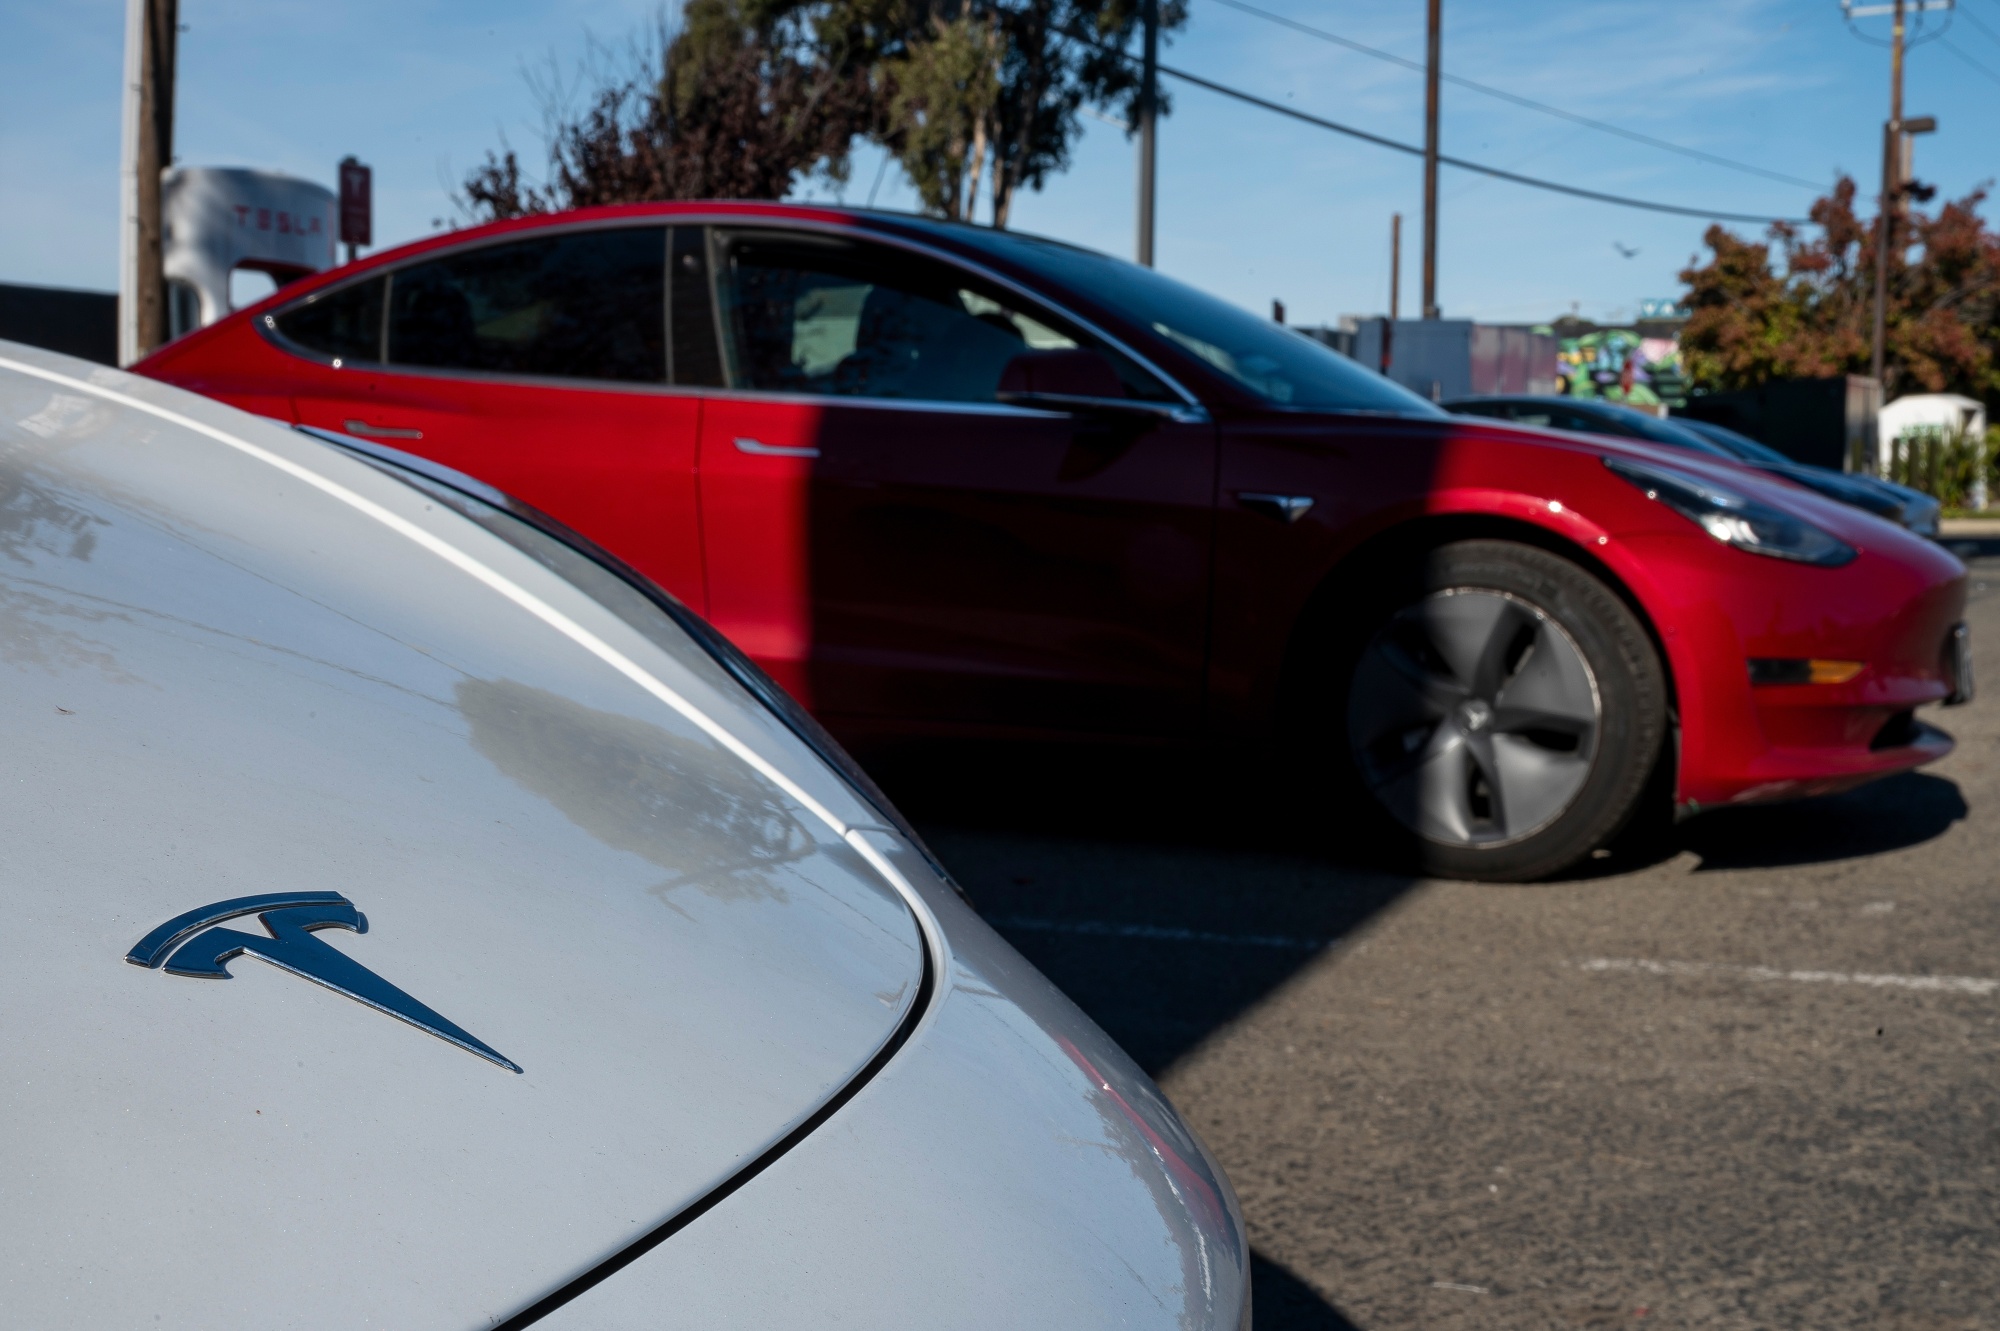 Tesla recalls more than 1 million vehicles over faulty power